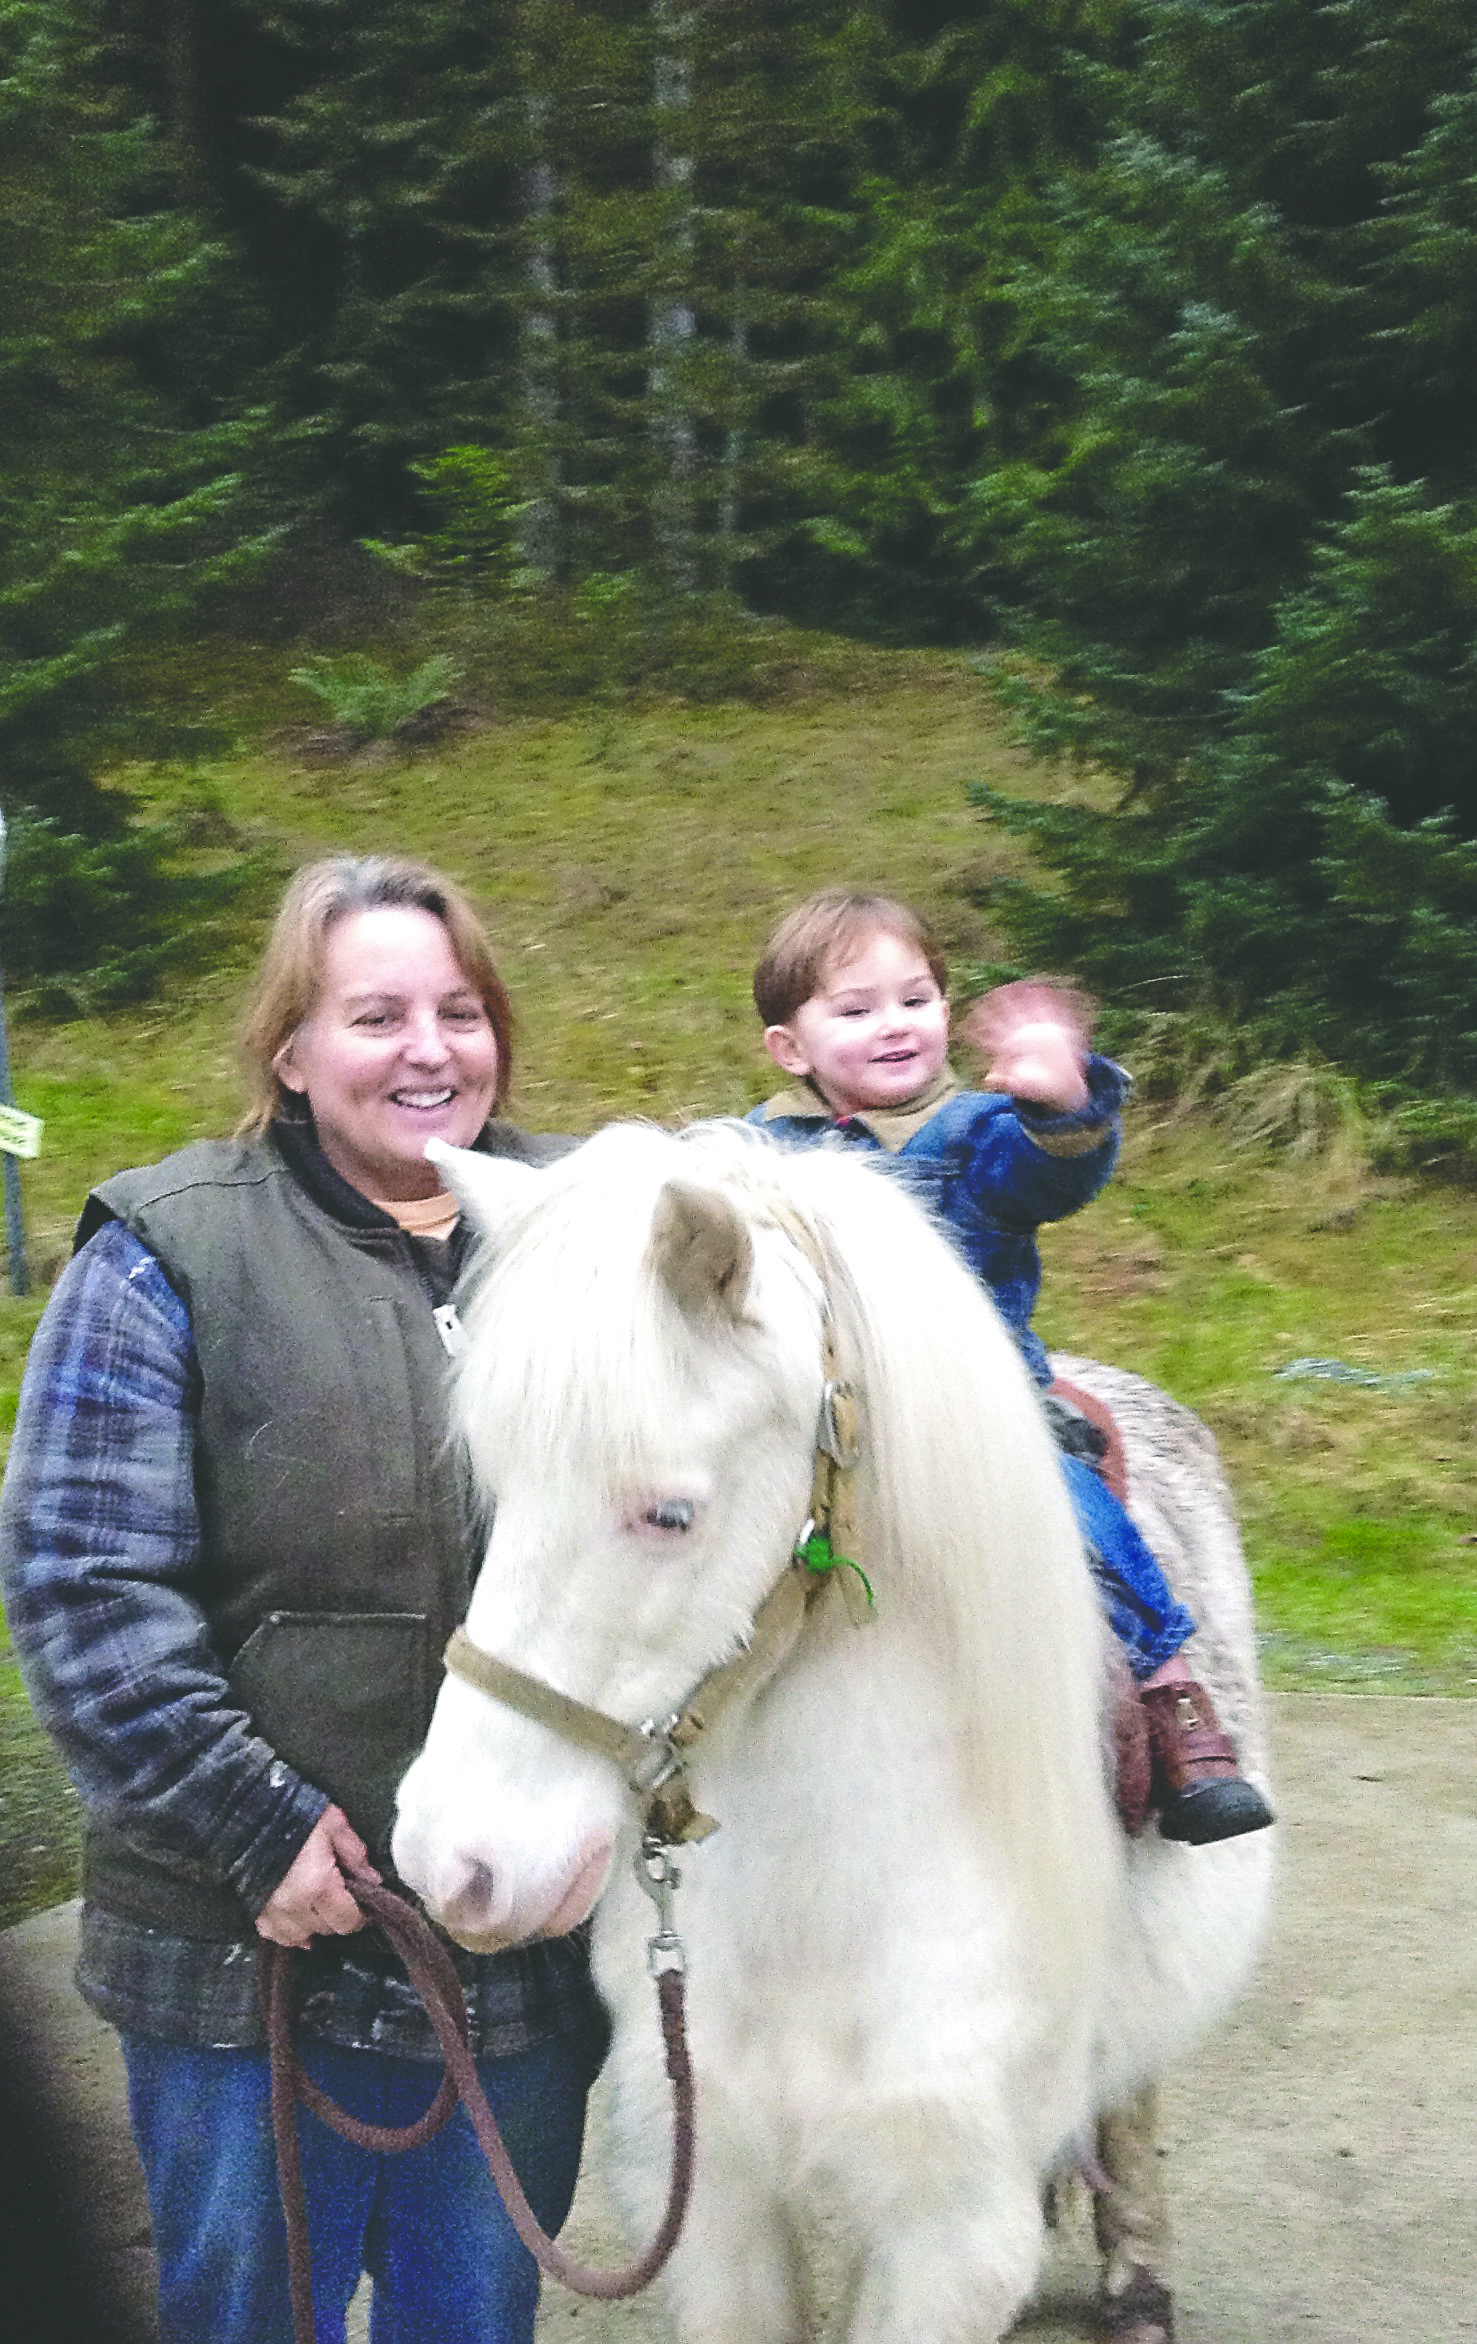 Karen Griffiths holds pony Snowball Express’ lead as he caters to grand-nephew